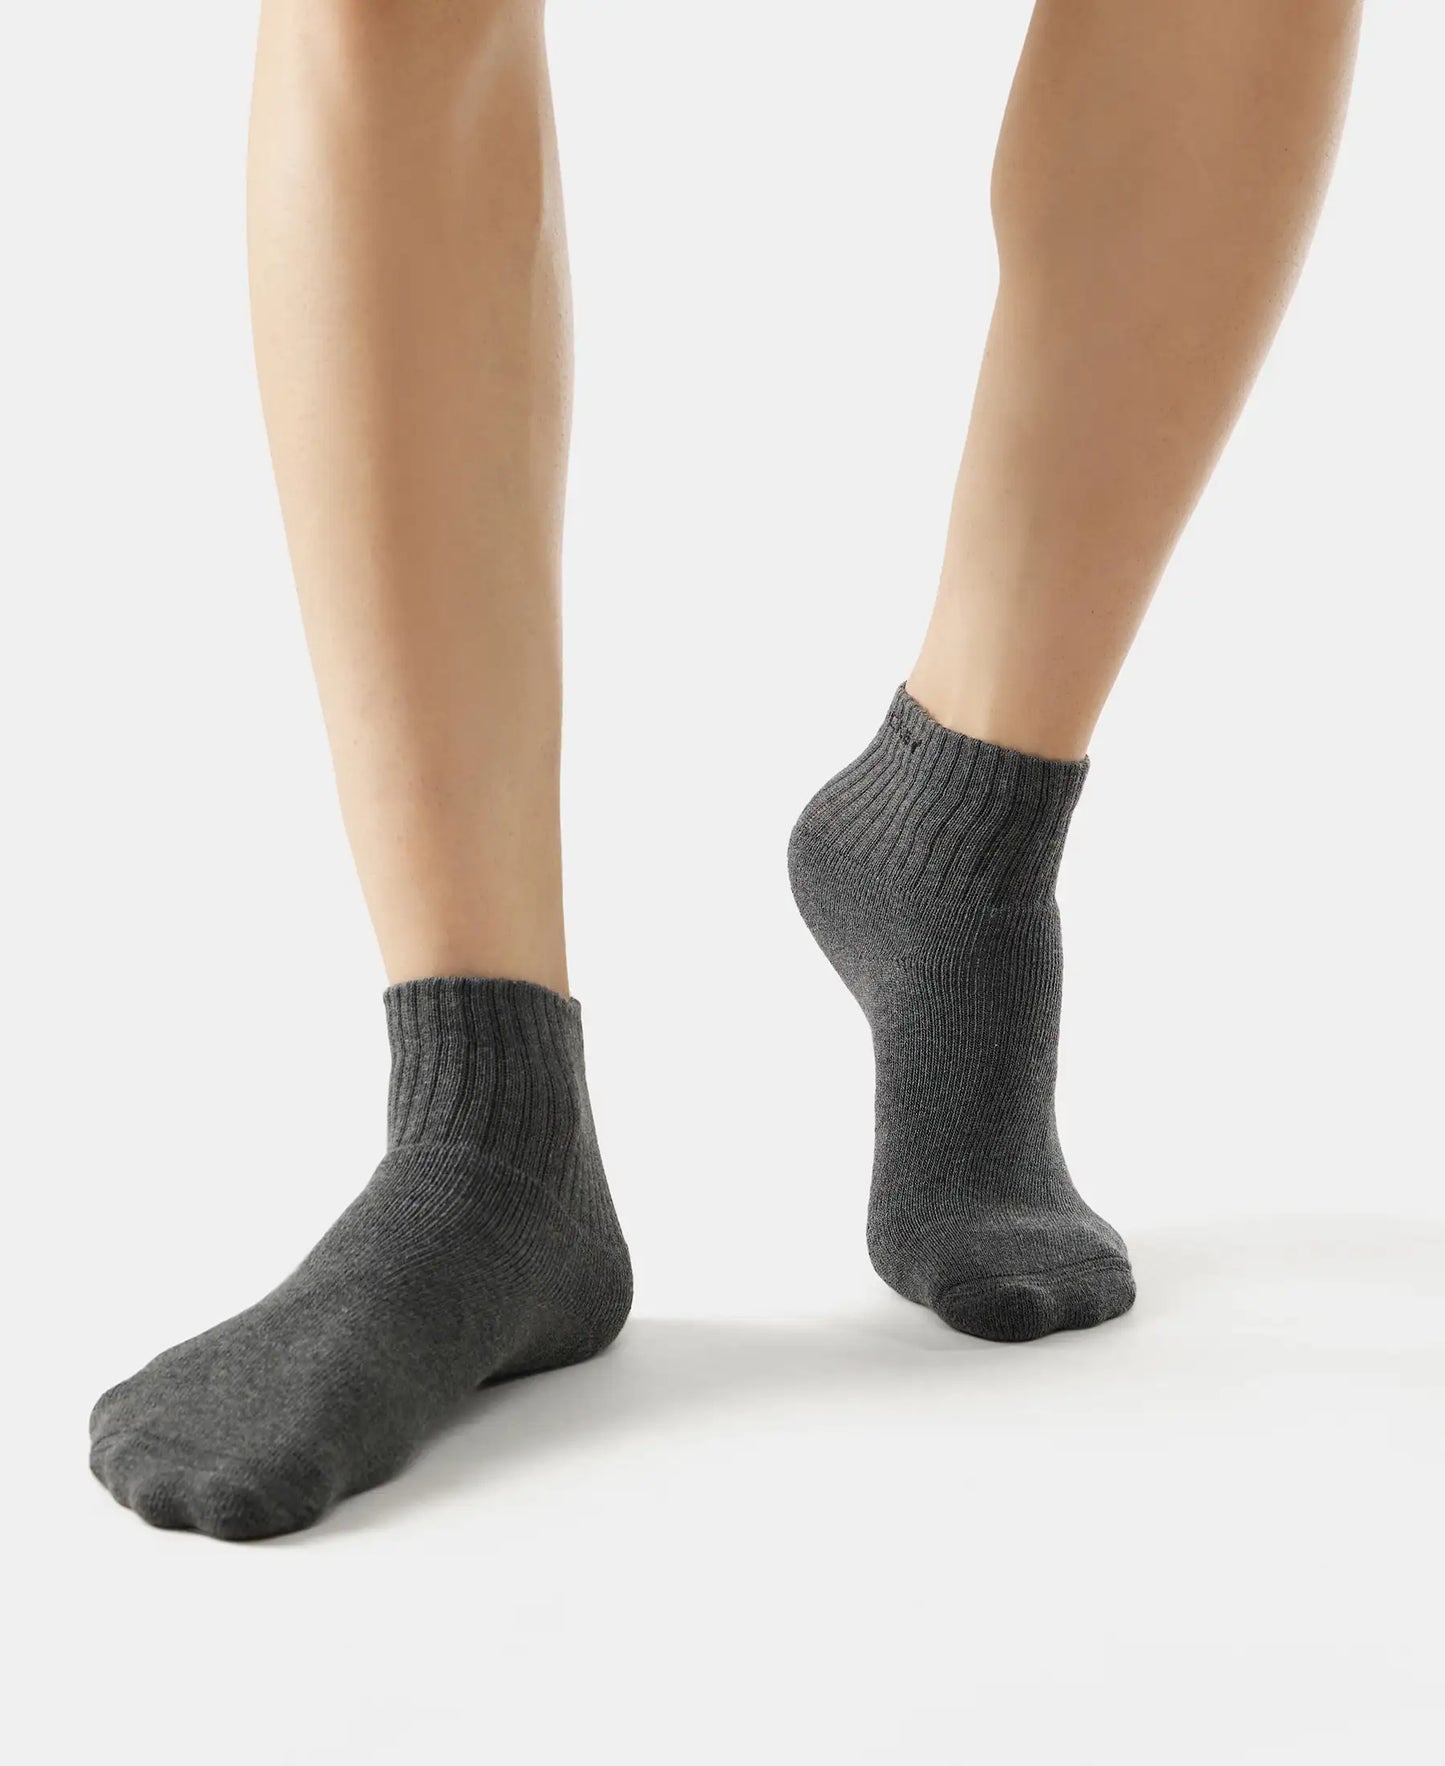 Compact Cotton Terry Ankle Length Socks With StayFresh Treatment - Black/Midgrey Melange/Charcoal Melange-9